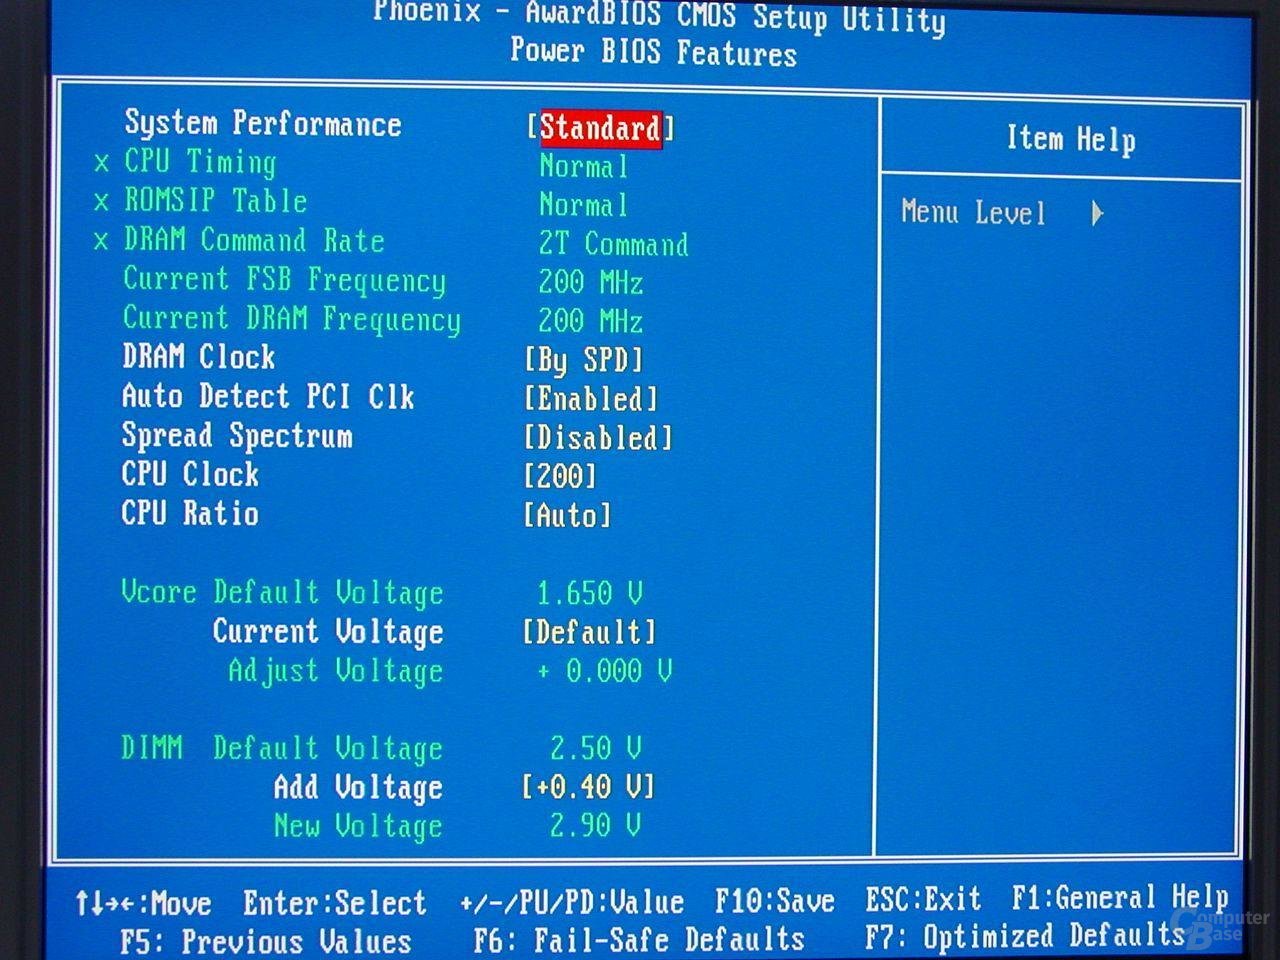 Bios - "Power Features"